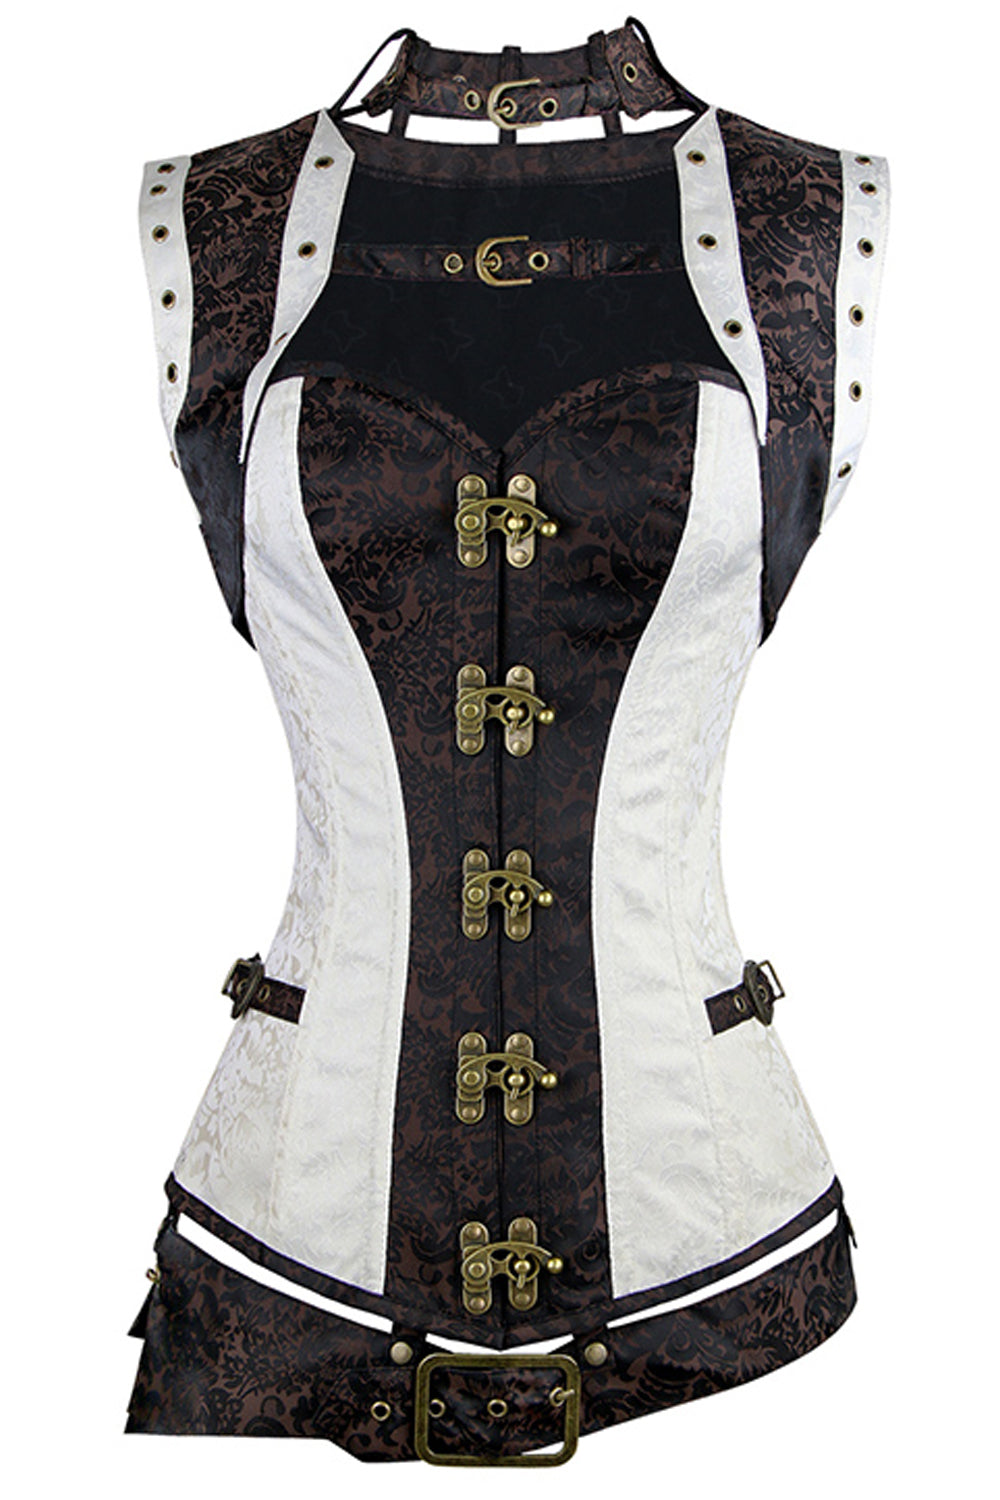 Atomic Two Toned Steel Boned Steampunk Overbust Corset